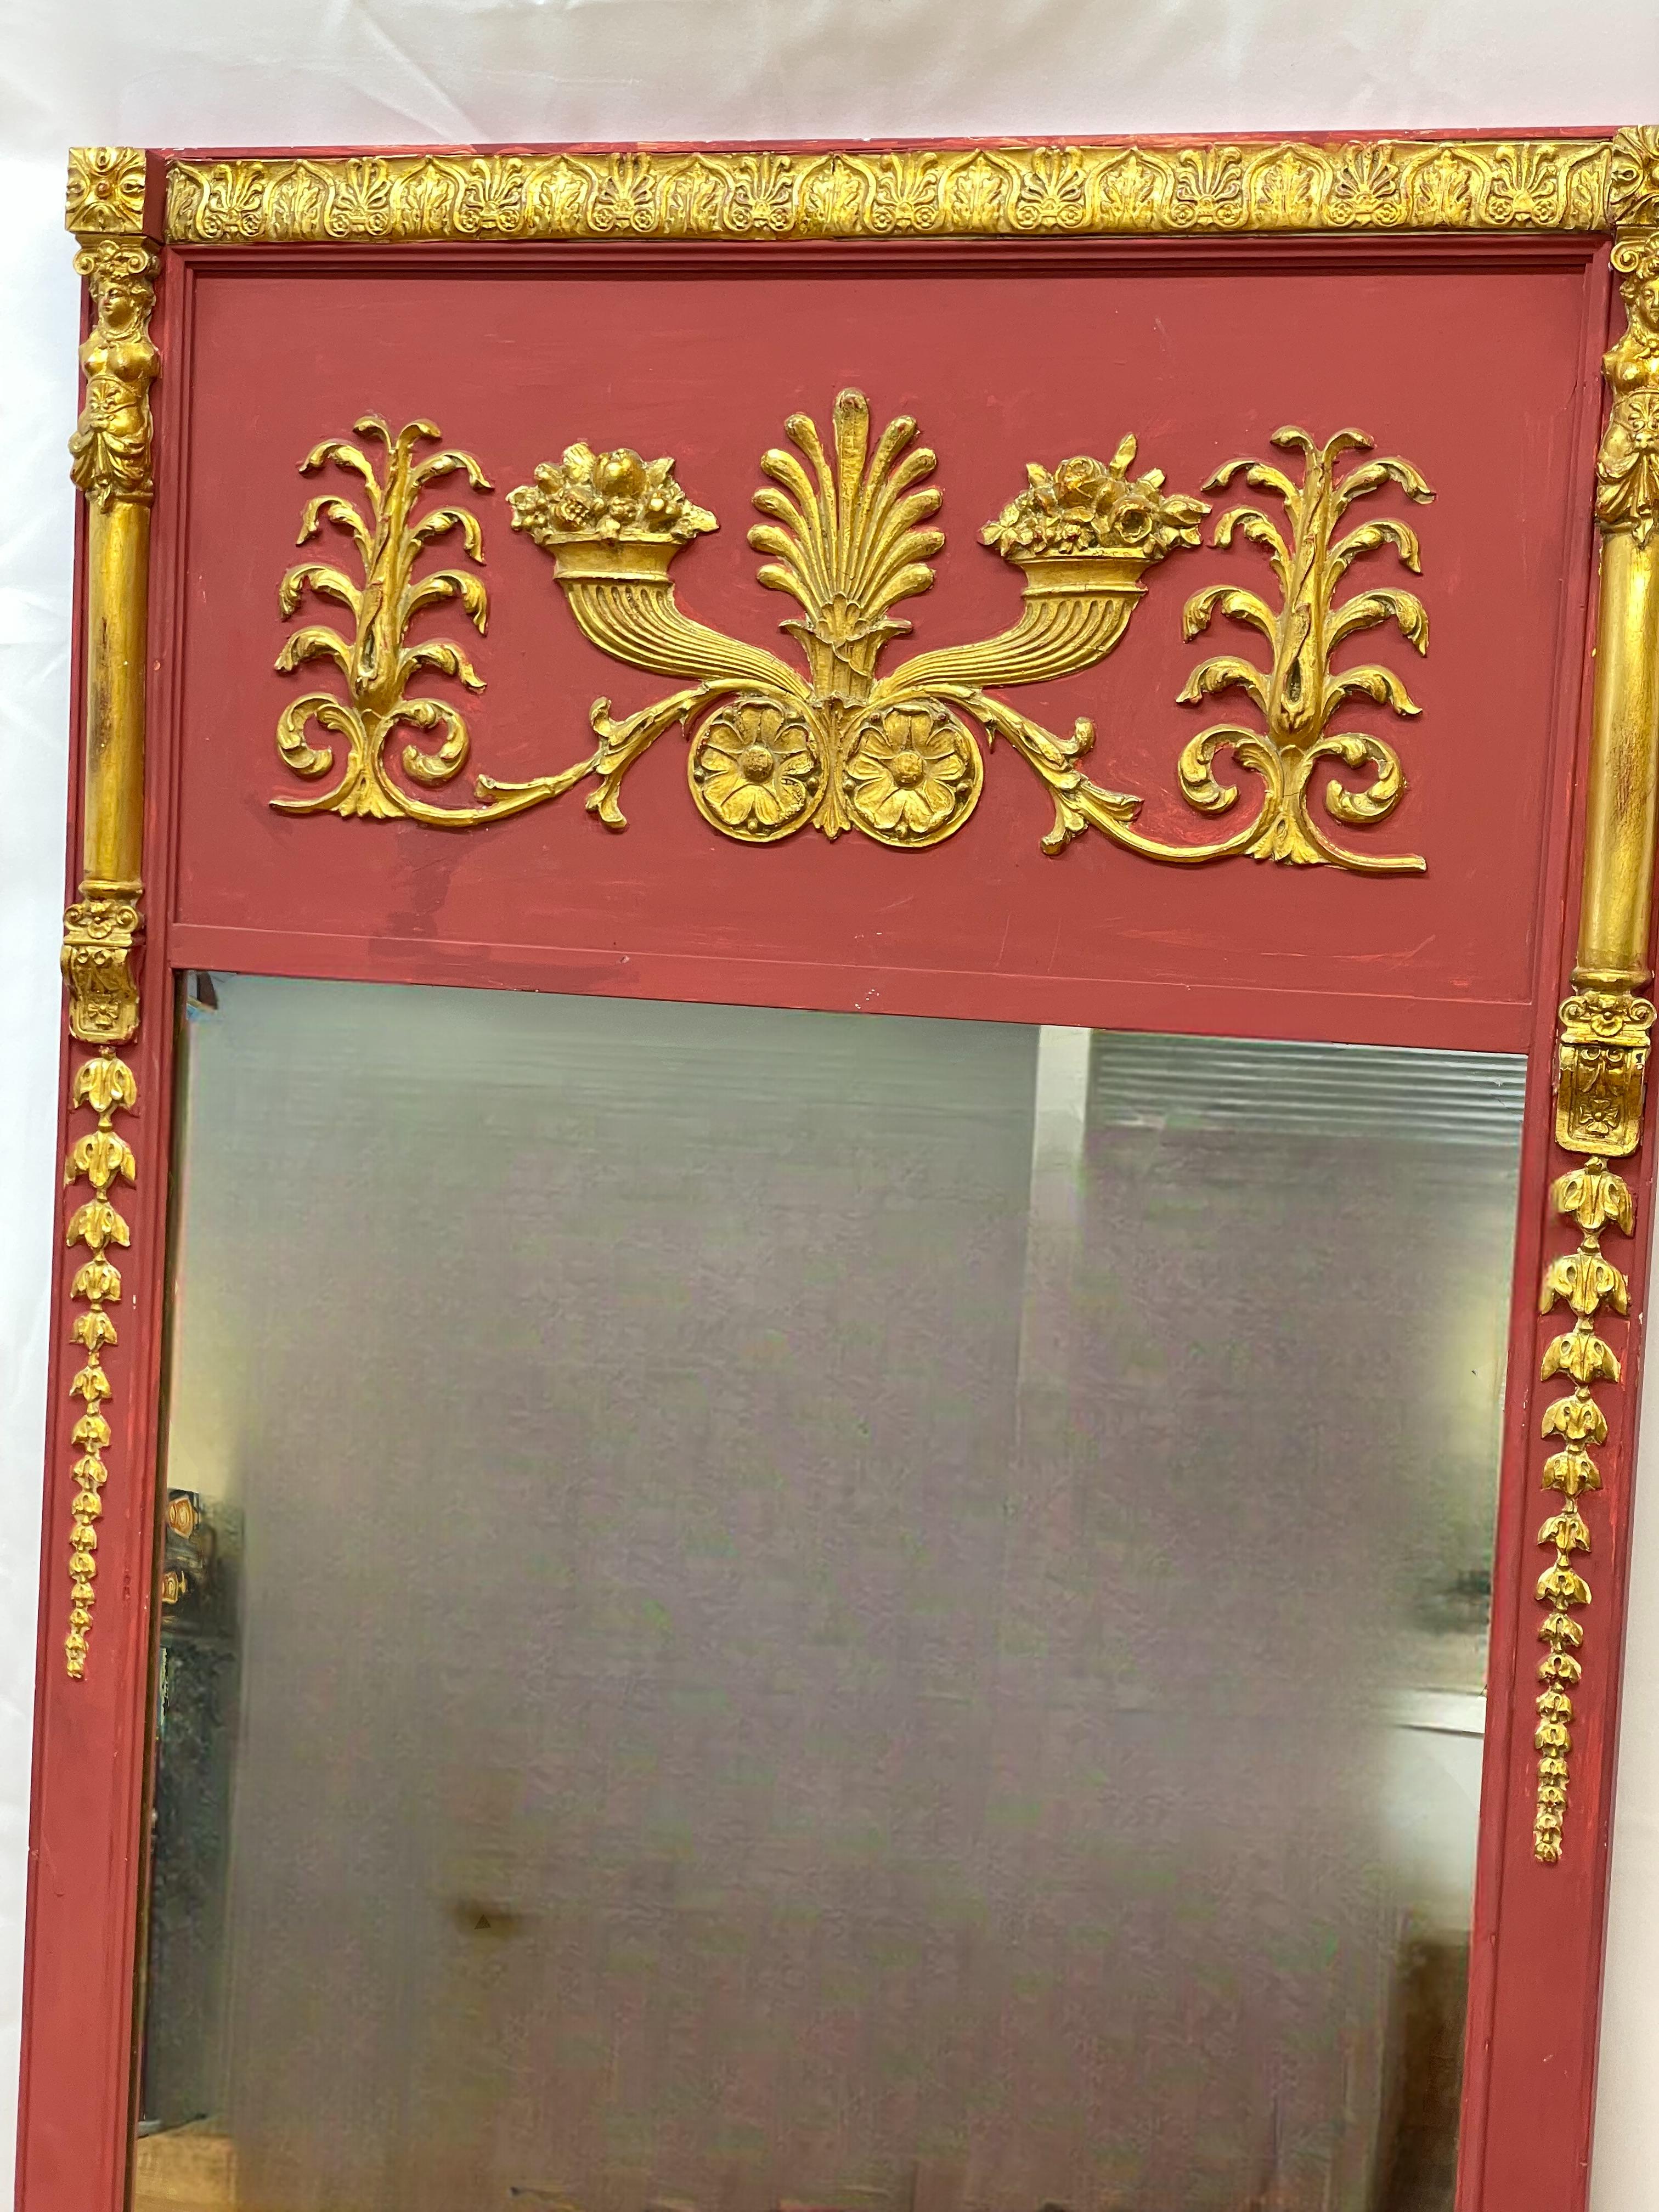 Neo-Classical Gilded and Red Painted Mirror With Cornucopia Design

28x1x52